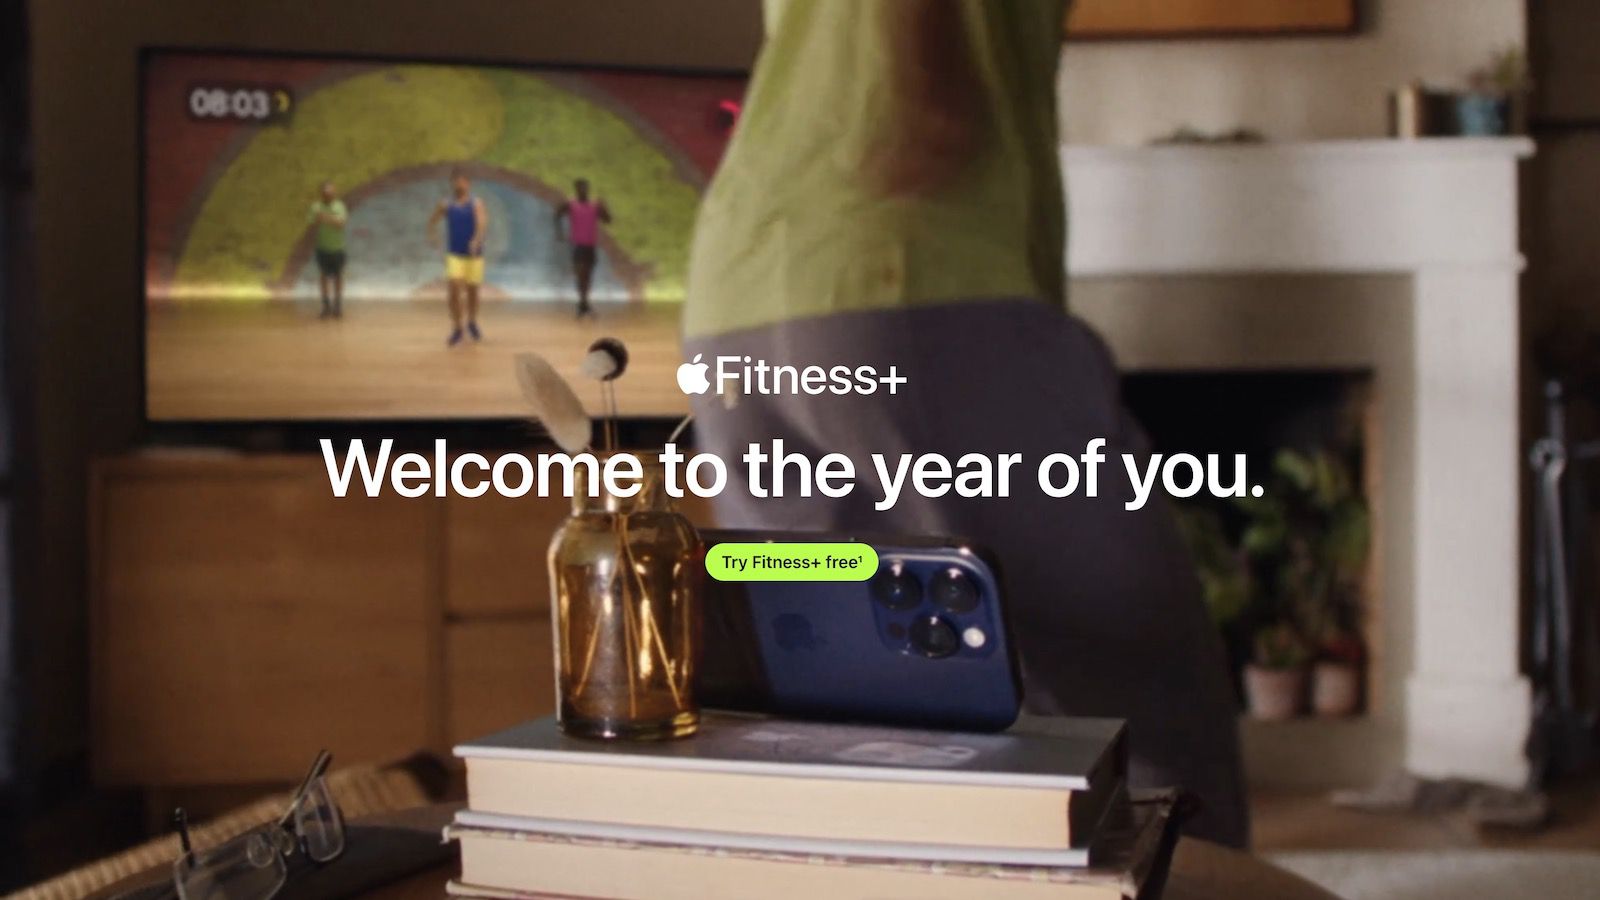 Apple Fitness+ Takes Over Apple's Home Page to Help You Reach Your New Year's Goals - macrumors.com